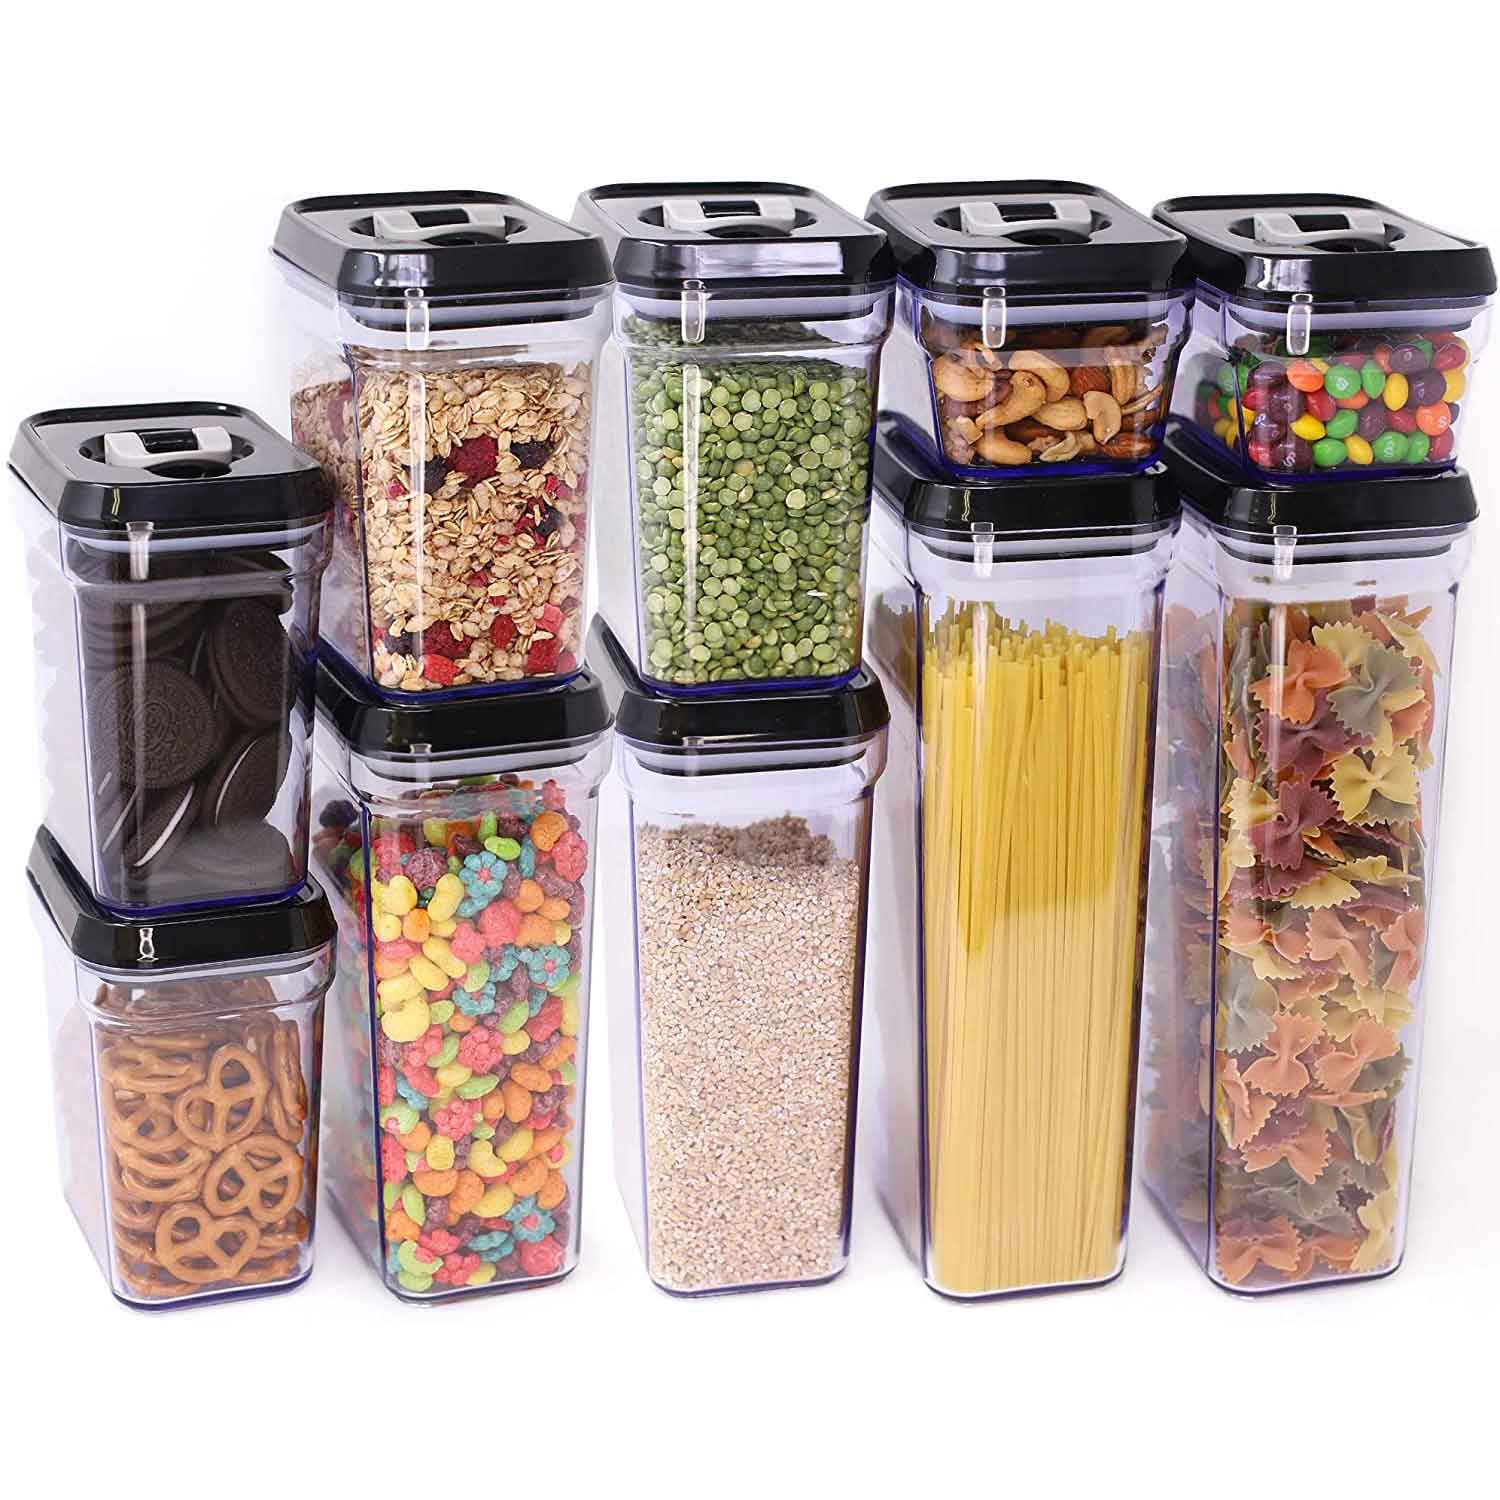 10-Piece Air-Tight Food Storage Container Set - The Hungry Pinner